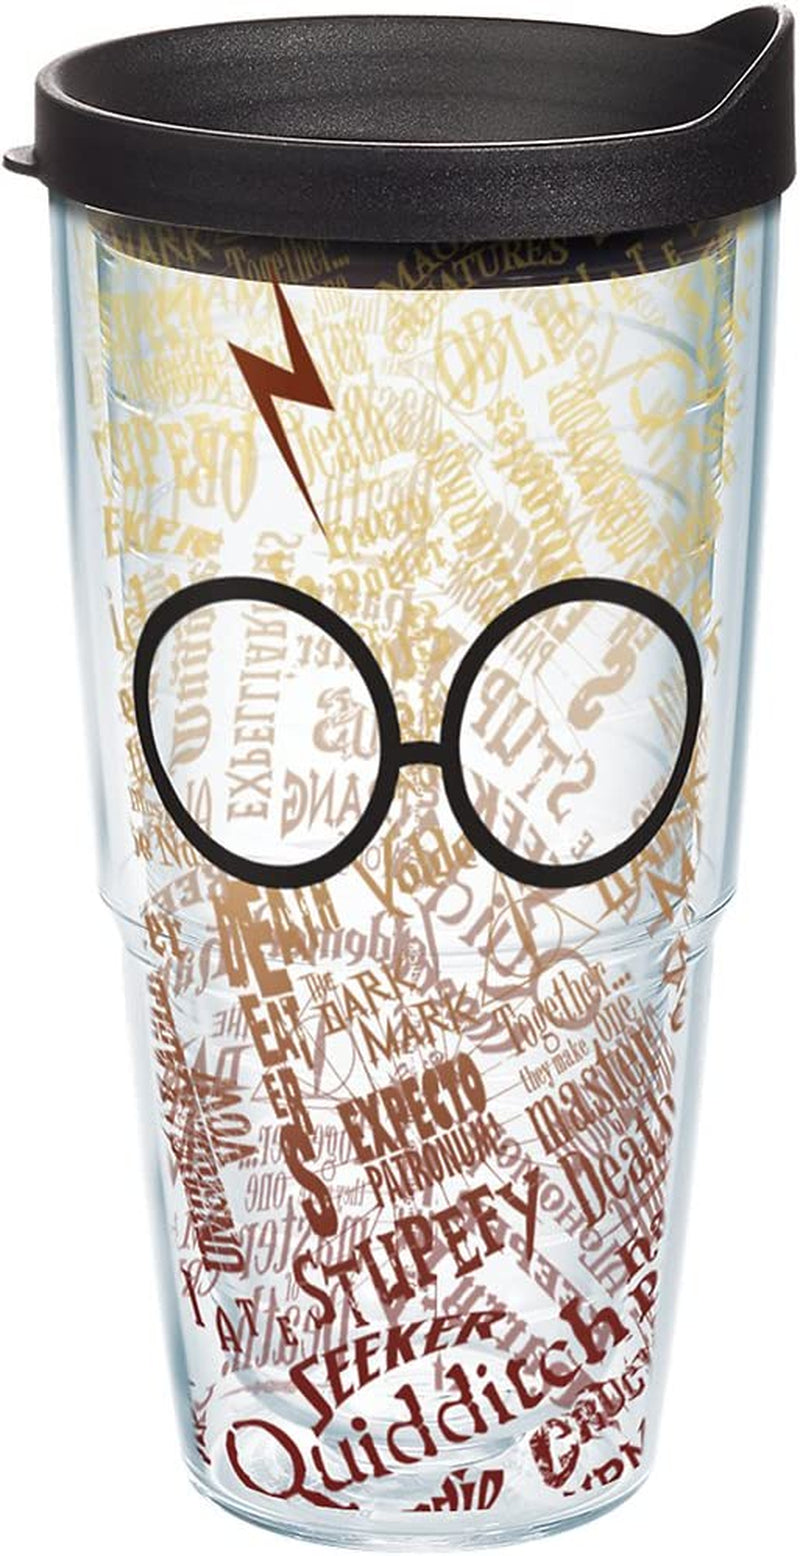 Tervis Made in USA Double Walled Harry Potter - Glasses and Scar Insulated Tumbler Cup Keeps Drinks Cold & Hot, 16Oz Mug, Classic Home & Garden > Kitchen & Dining > Tableware > Drinkware Tervis Black/White 24oz 